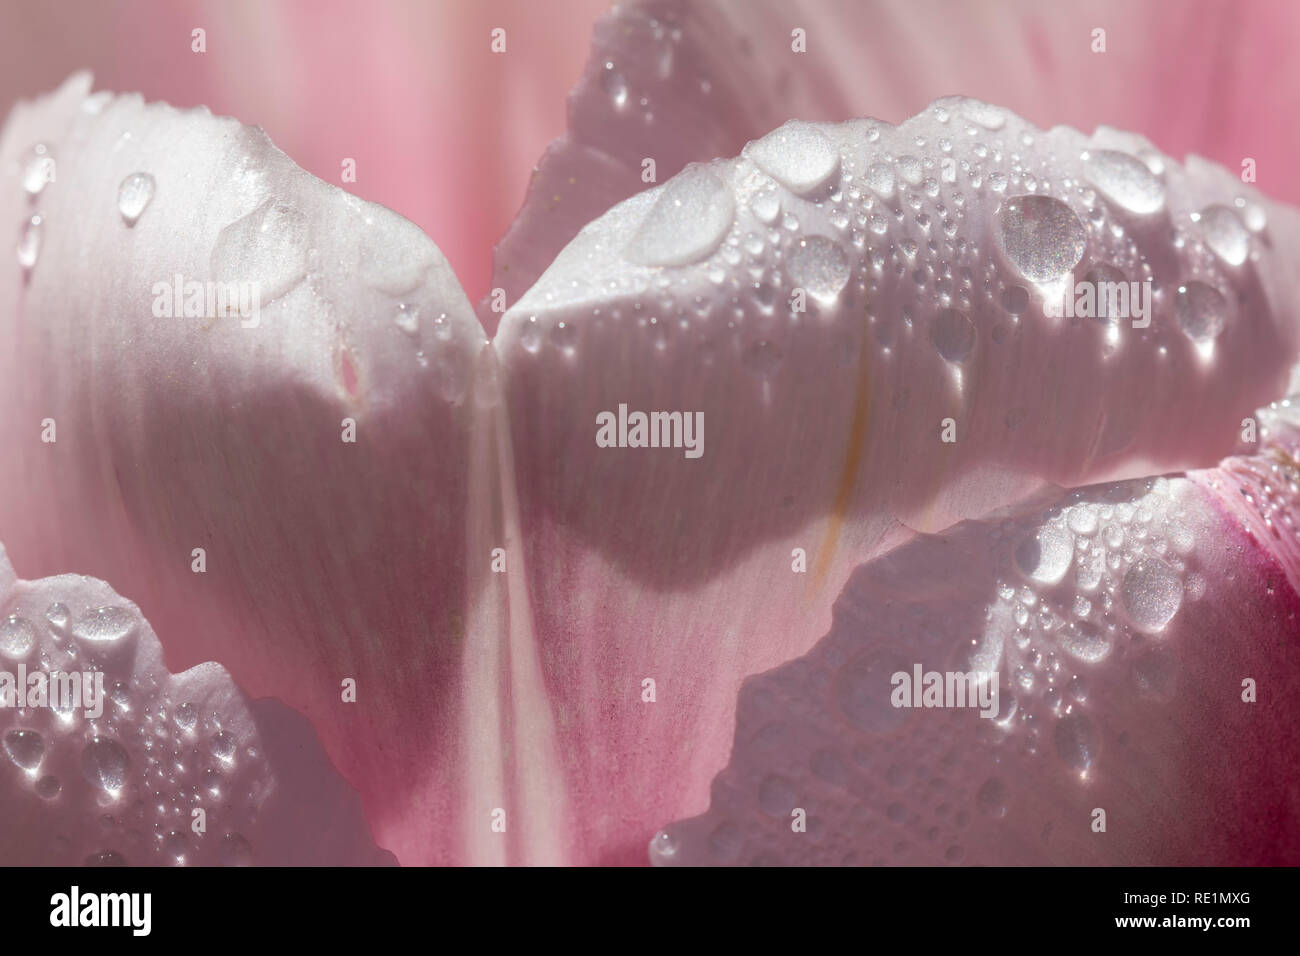 Extreme close up of dew drops on some pink petals Stock Photo